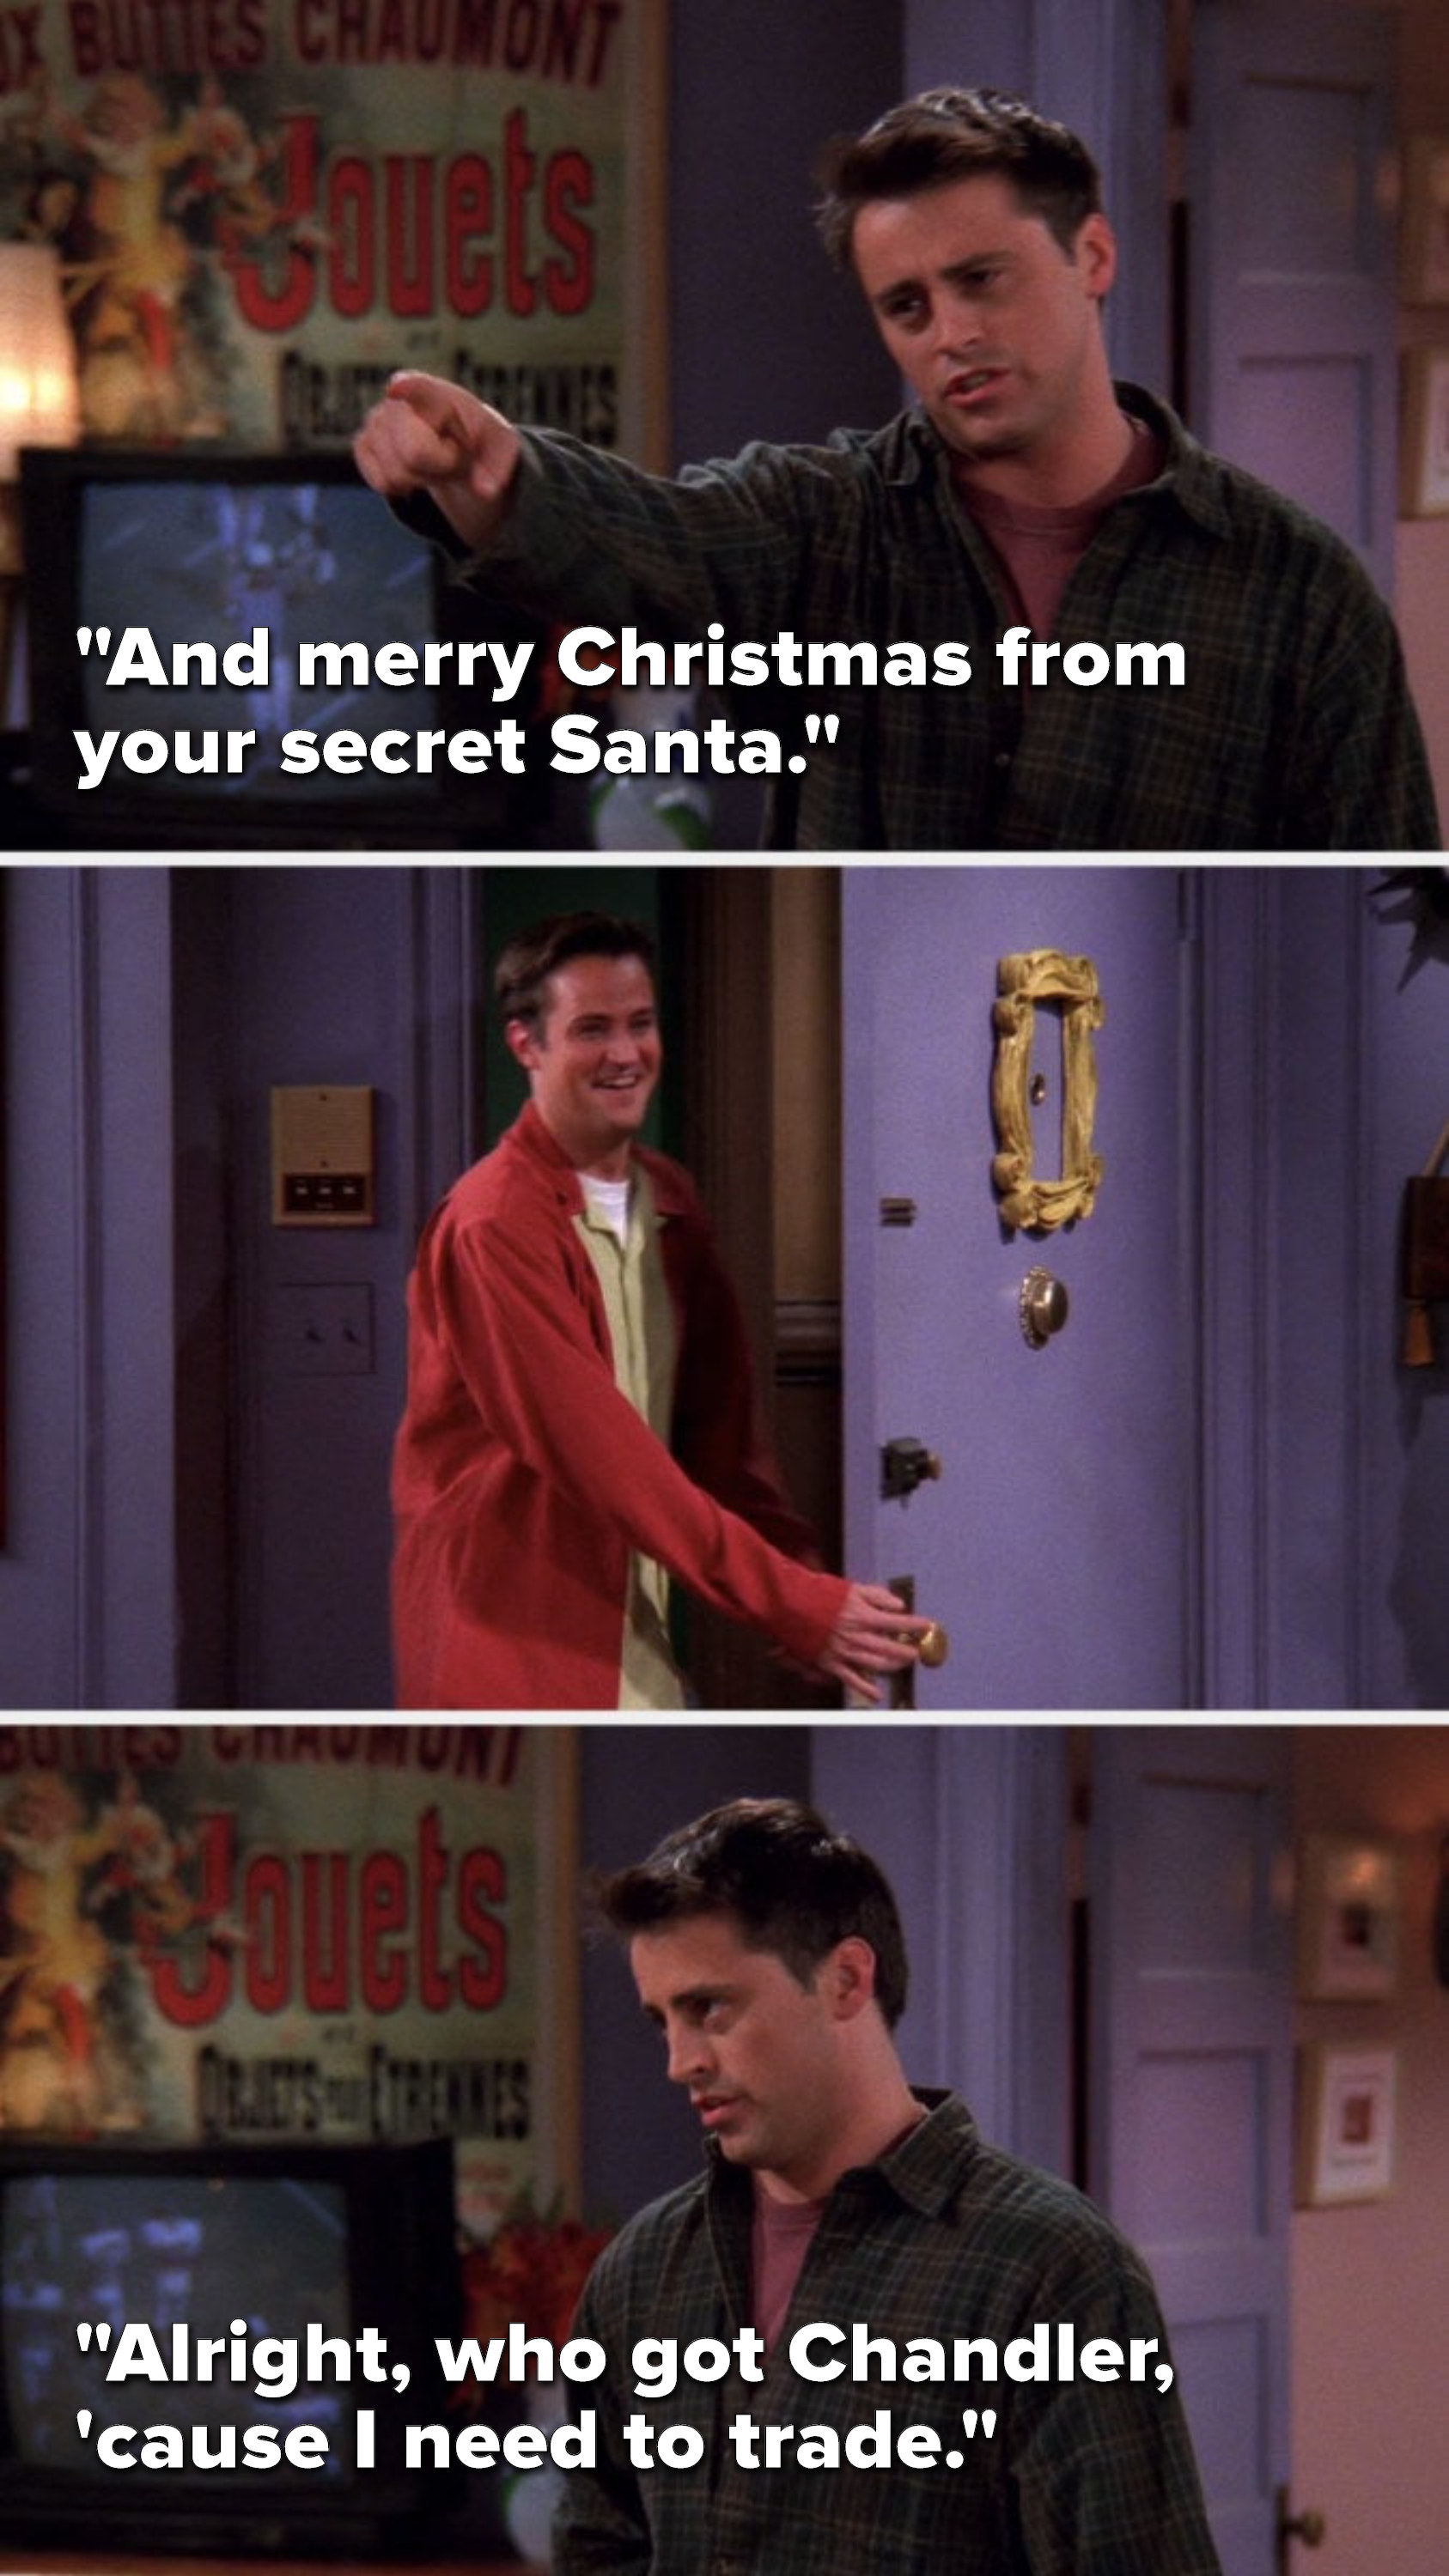 Joey says, &quot;And merry Christmas from your secret Santa,&quot; Chandler smiles and leaves, and then Joey says, Alright, who got Chandler, &#x27;cause I need to trade&quot;